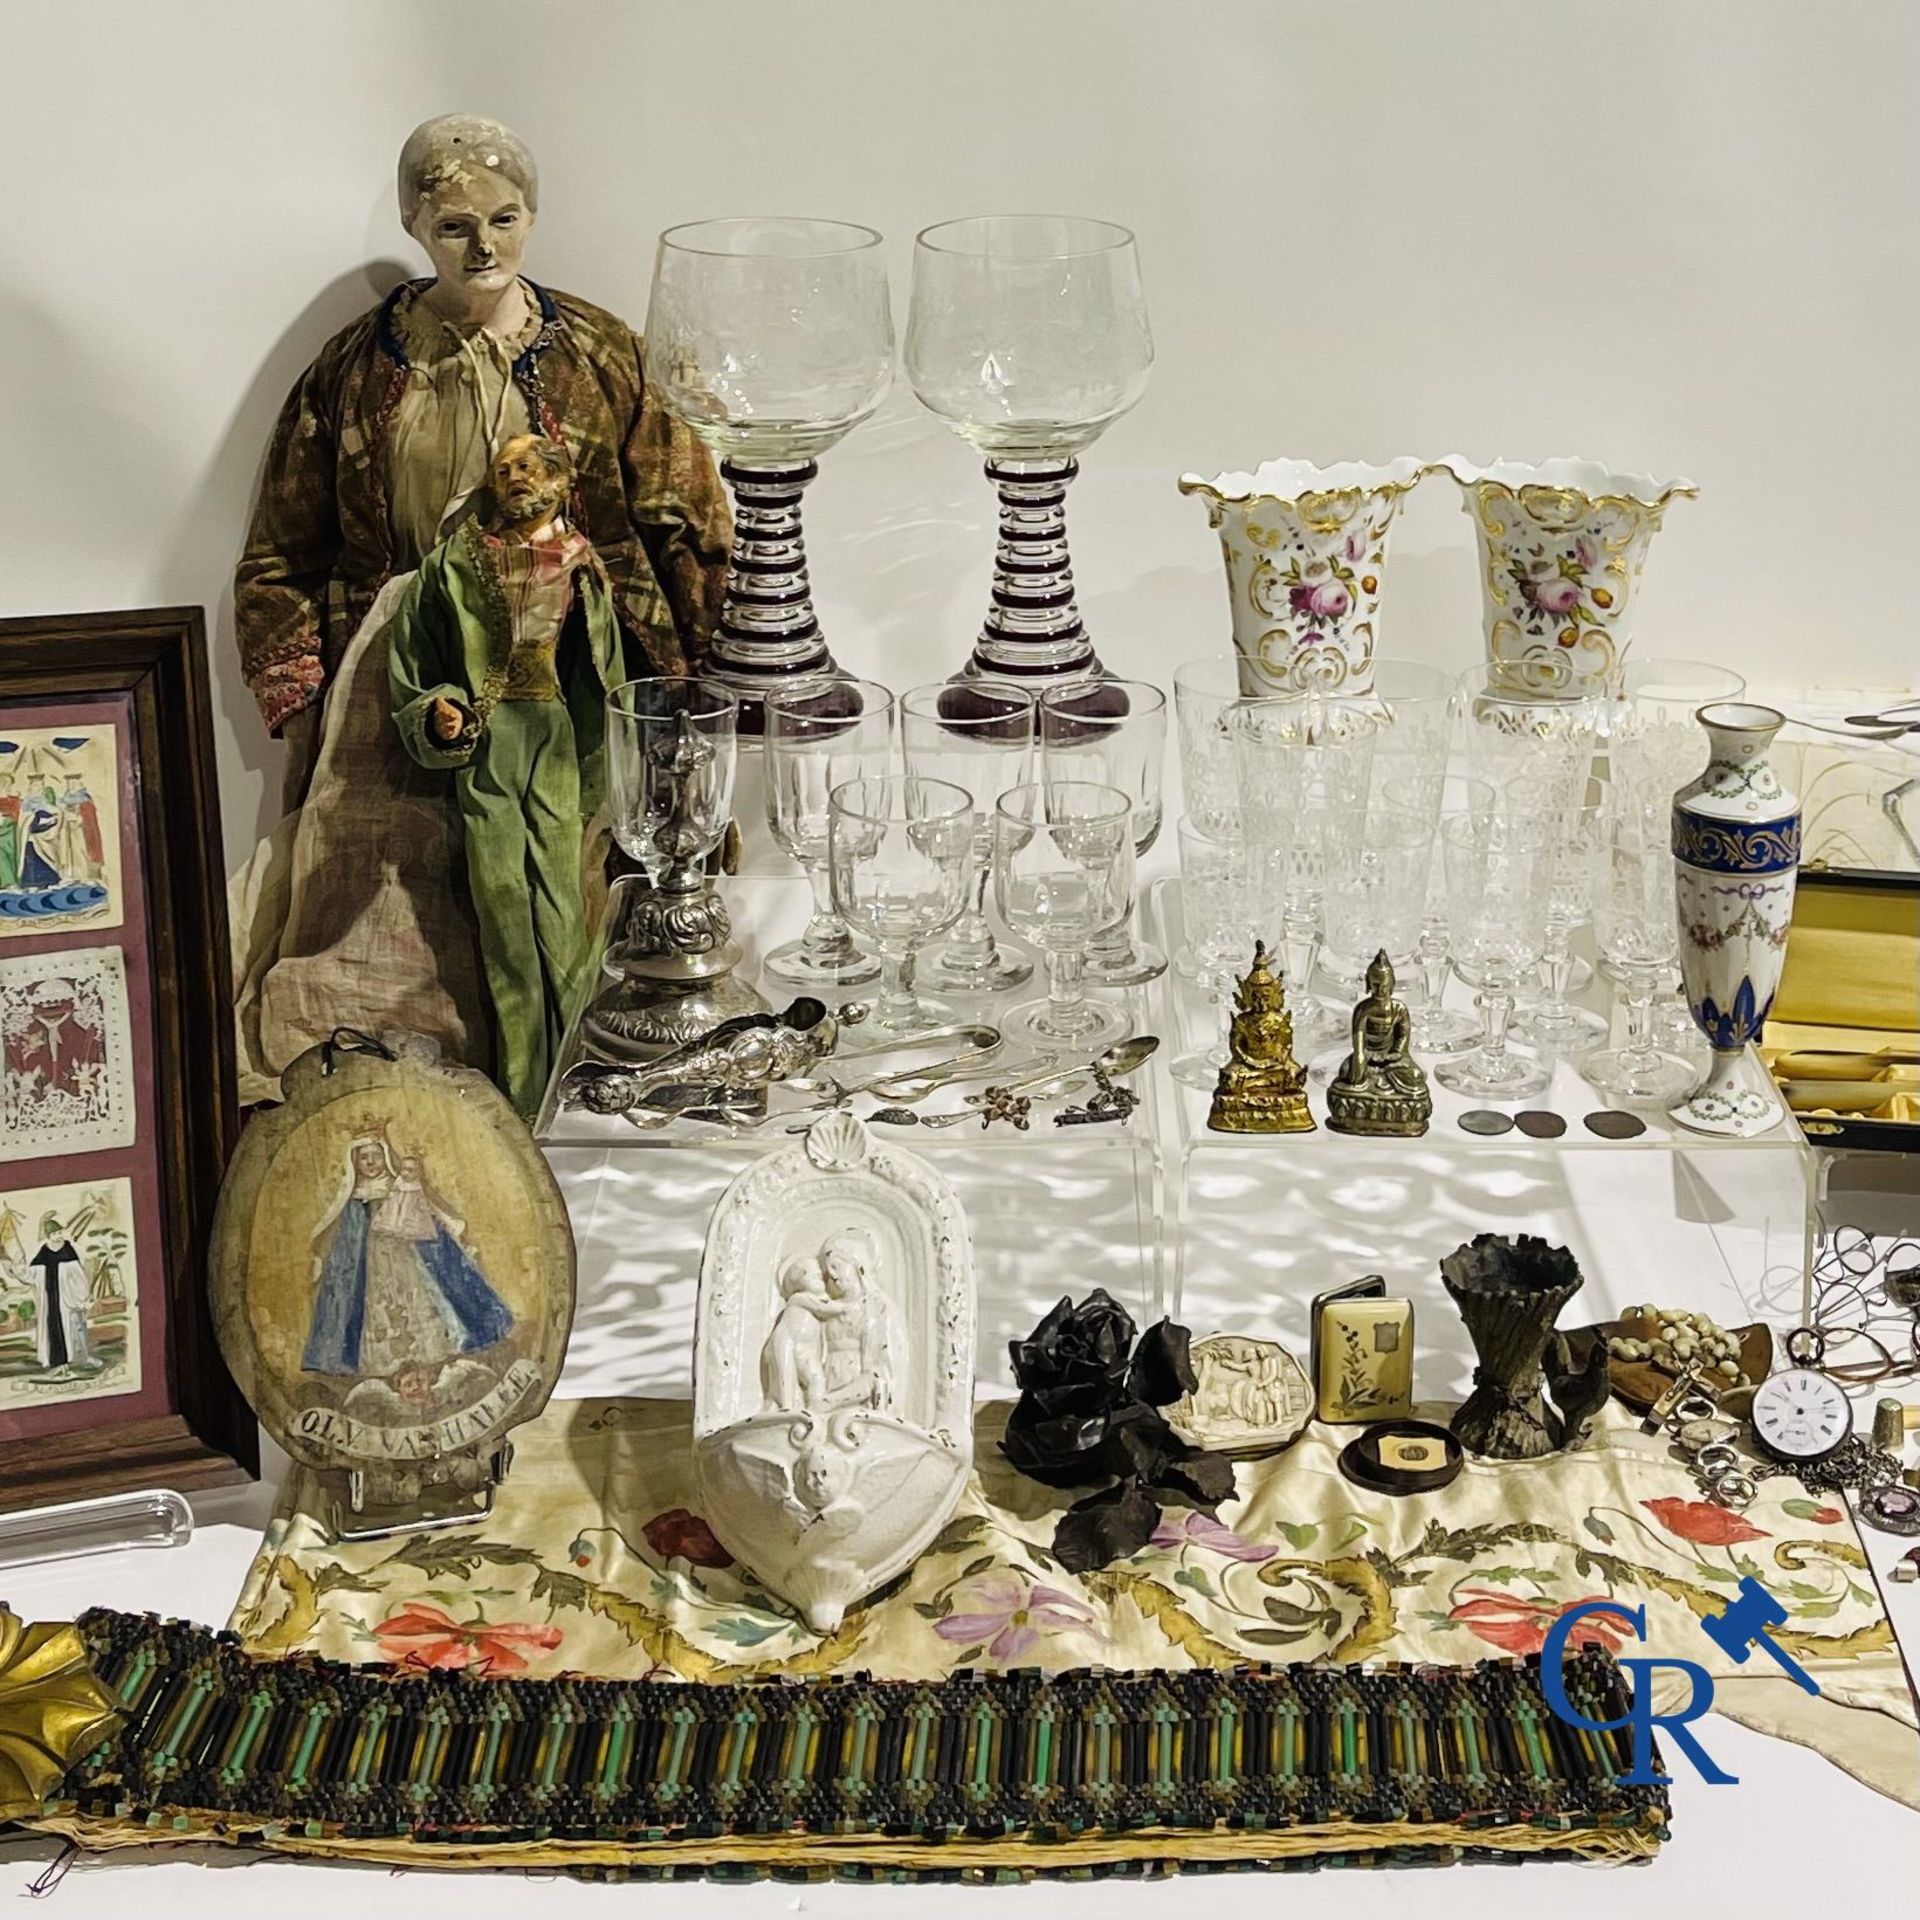 Nice lot with various antiques.